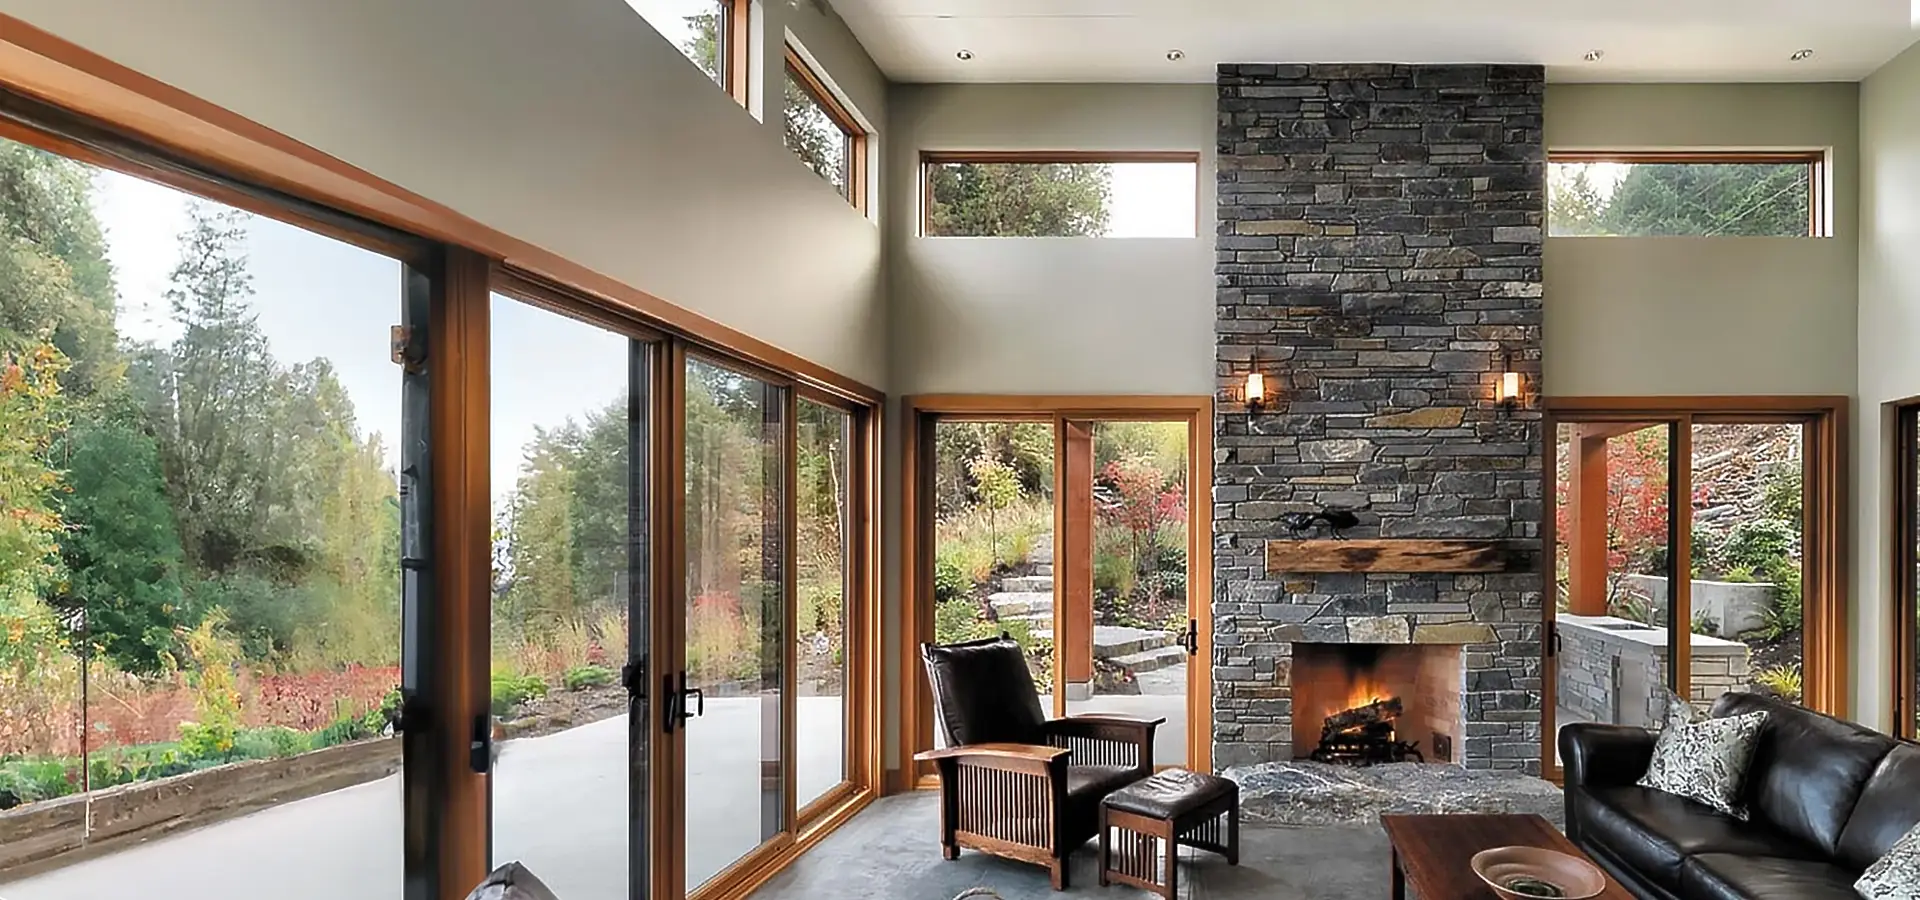 stone wall fireplace in beautiful renovated home